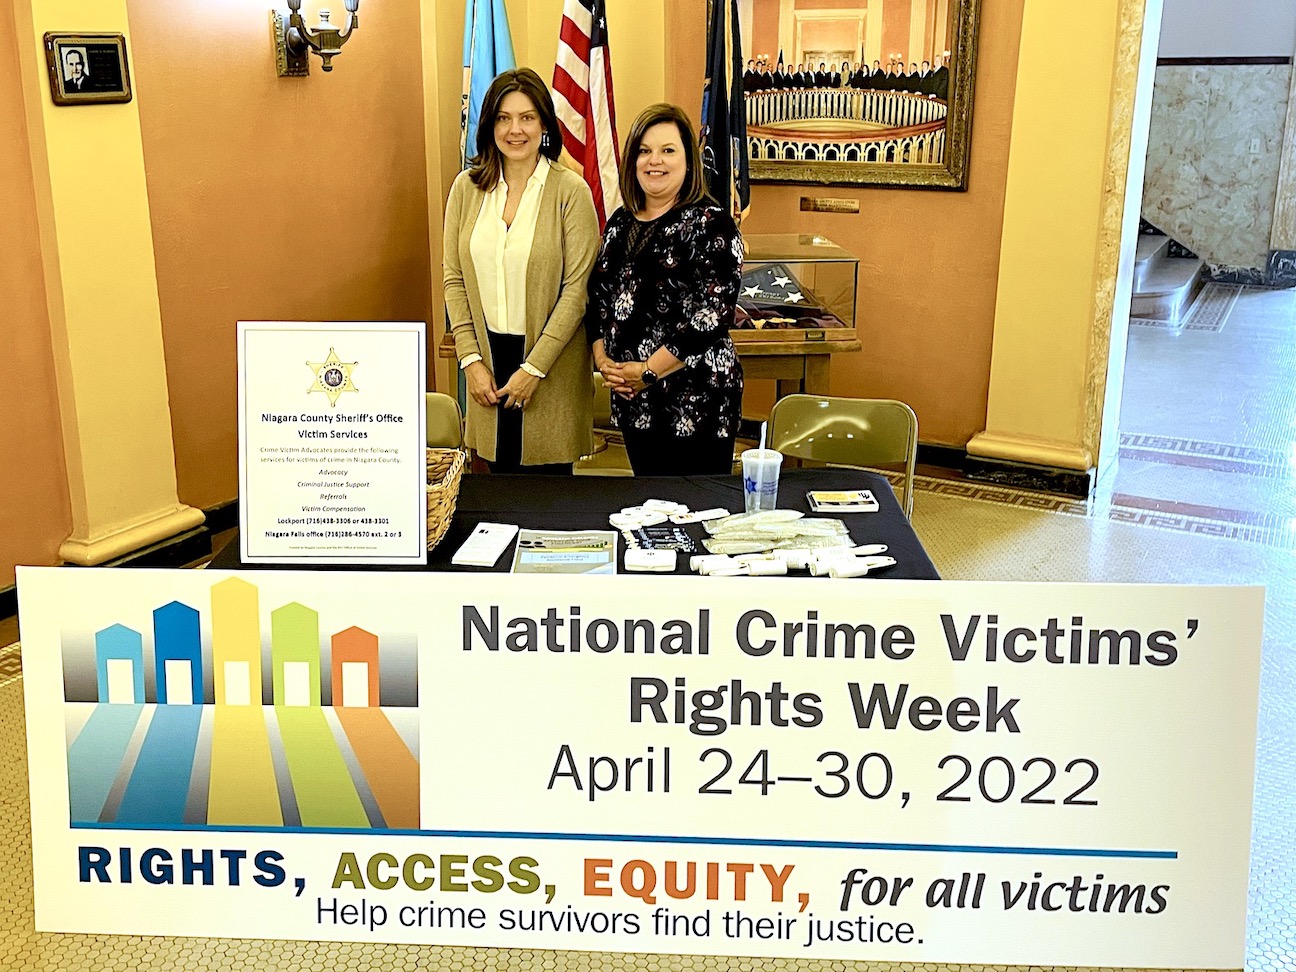 Pictured, from left: Niagara County Victim Services Coordinator Stacy Suess and Crime Victim Advocate Kelly Bird are shown in front of their display in the Niagara County Courthouse. (Submitted photo)